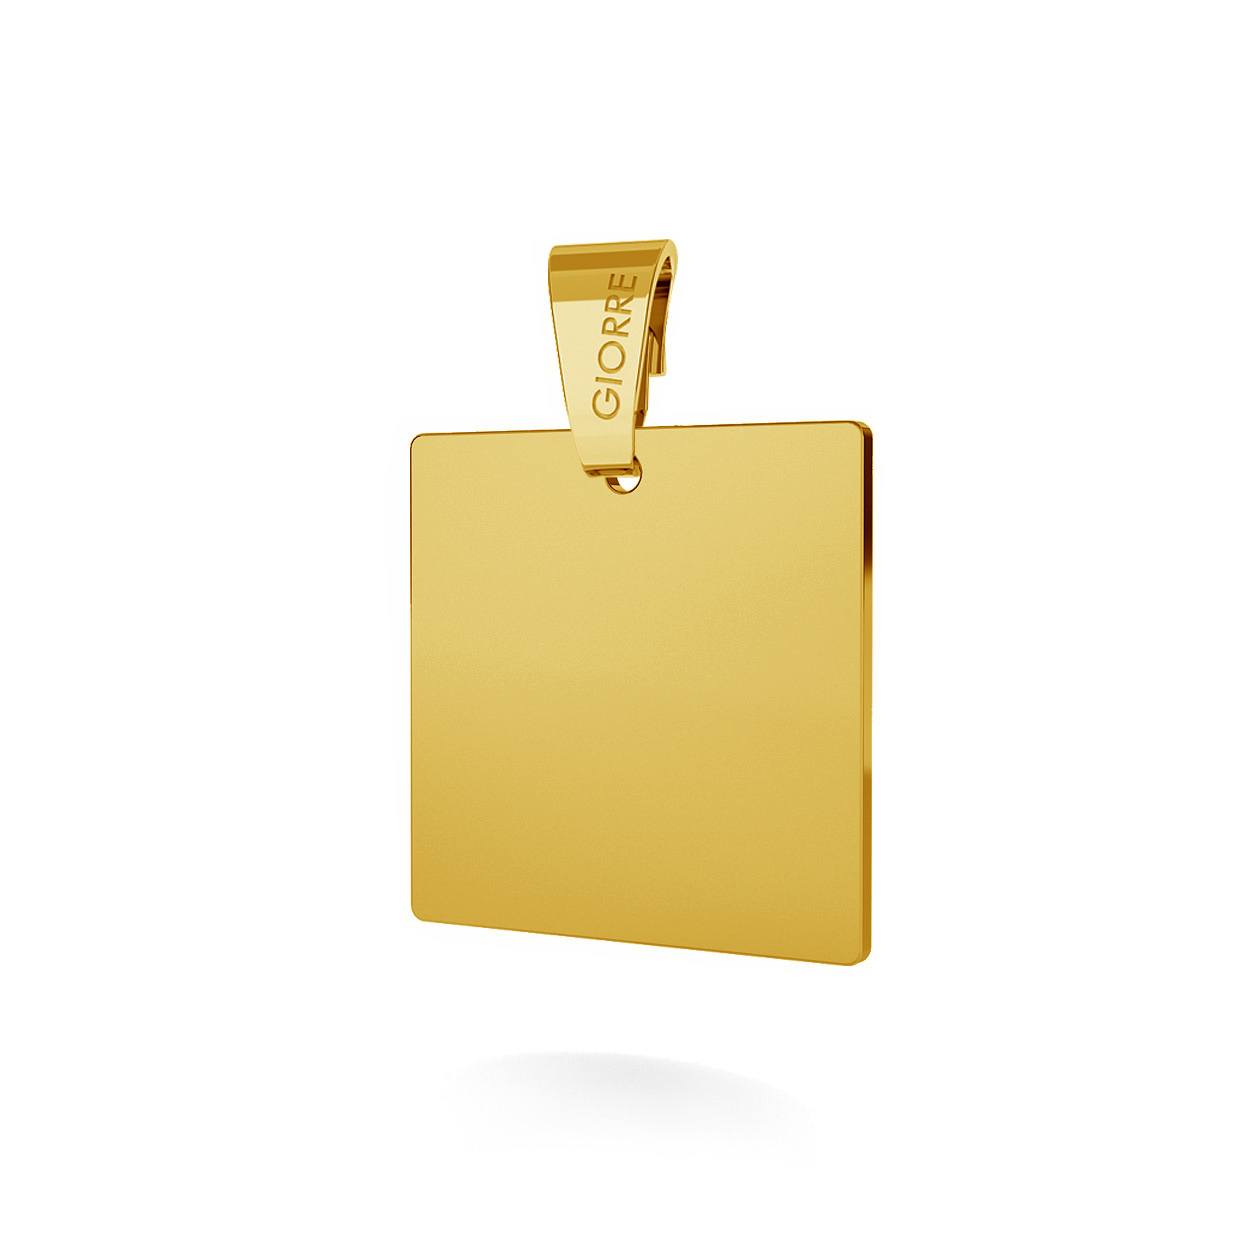 CHARM WITH ENGRAVE, SQUARE, SILVER 925, RHODIUM OR GOLD PLATED